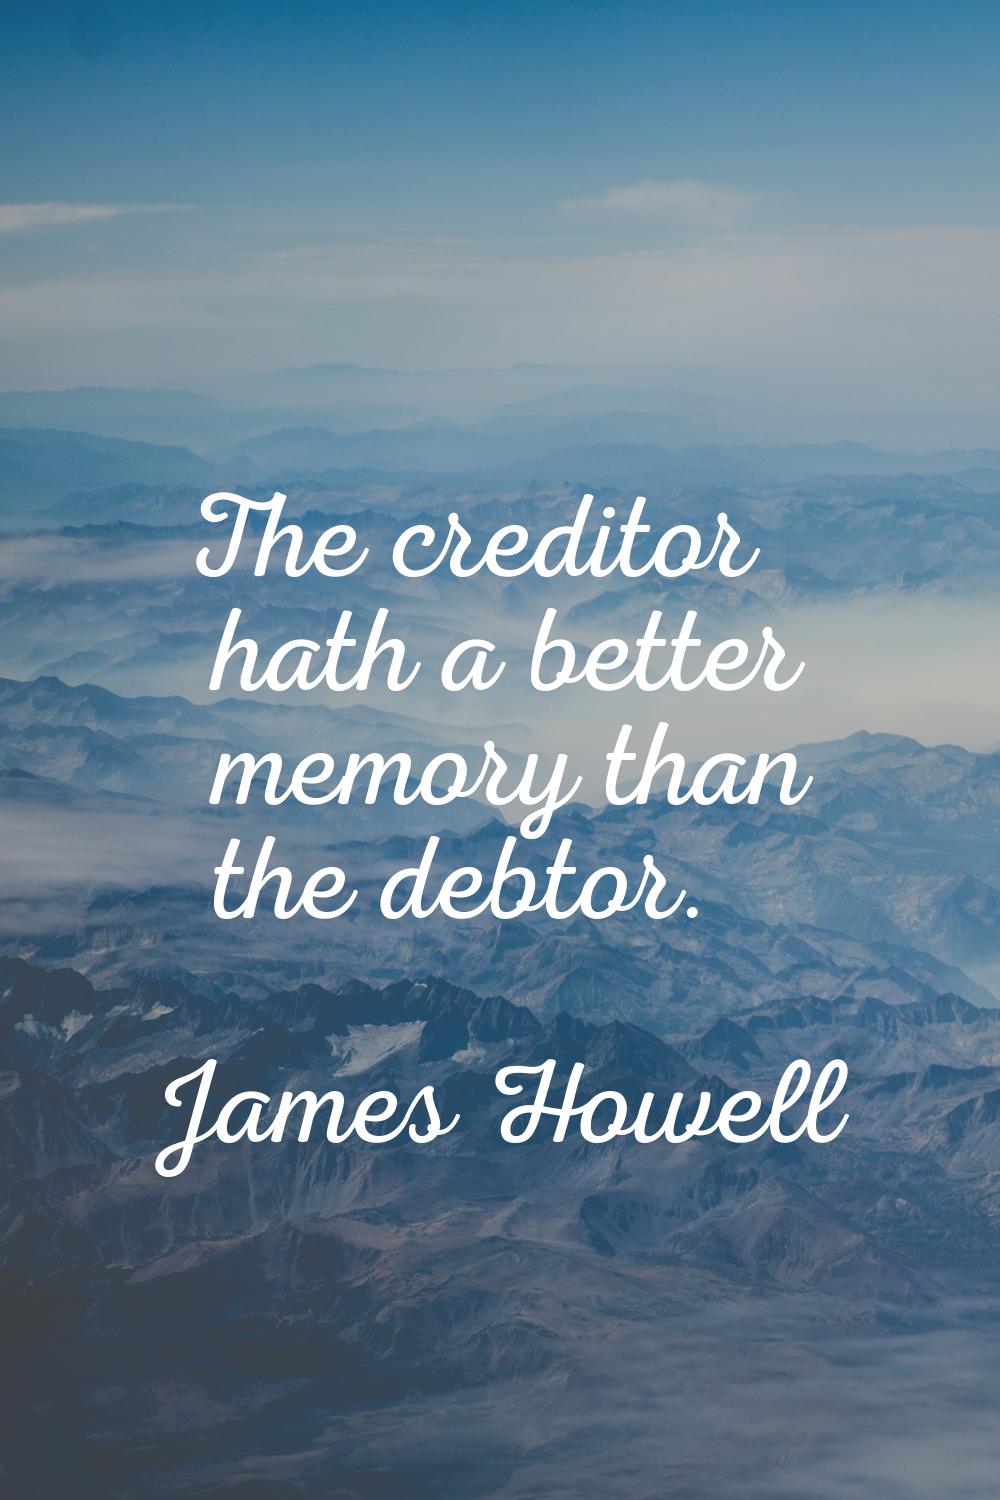 The creditor hath a better memory than the debtor.